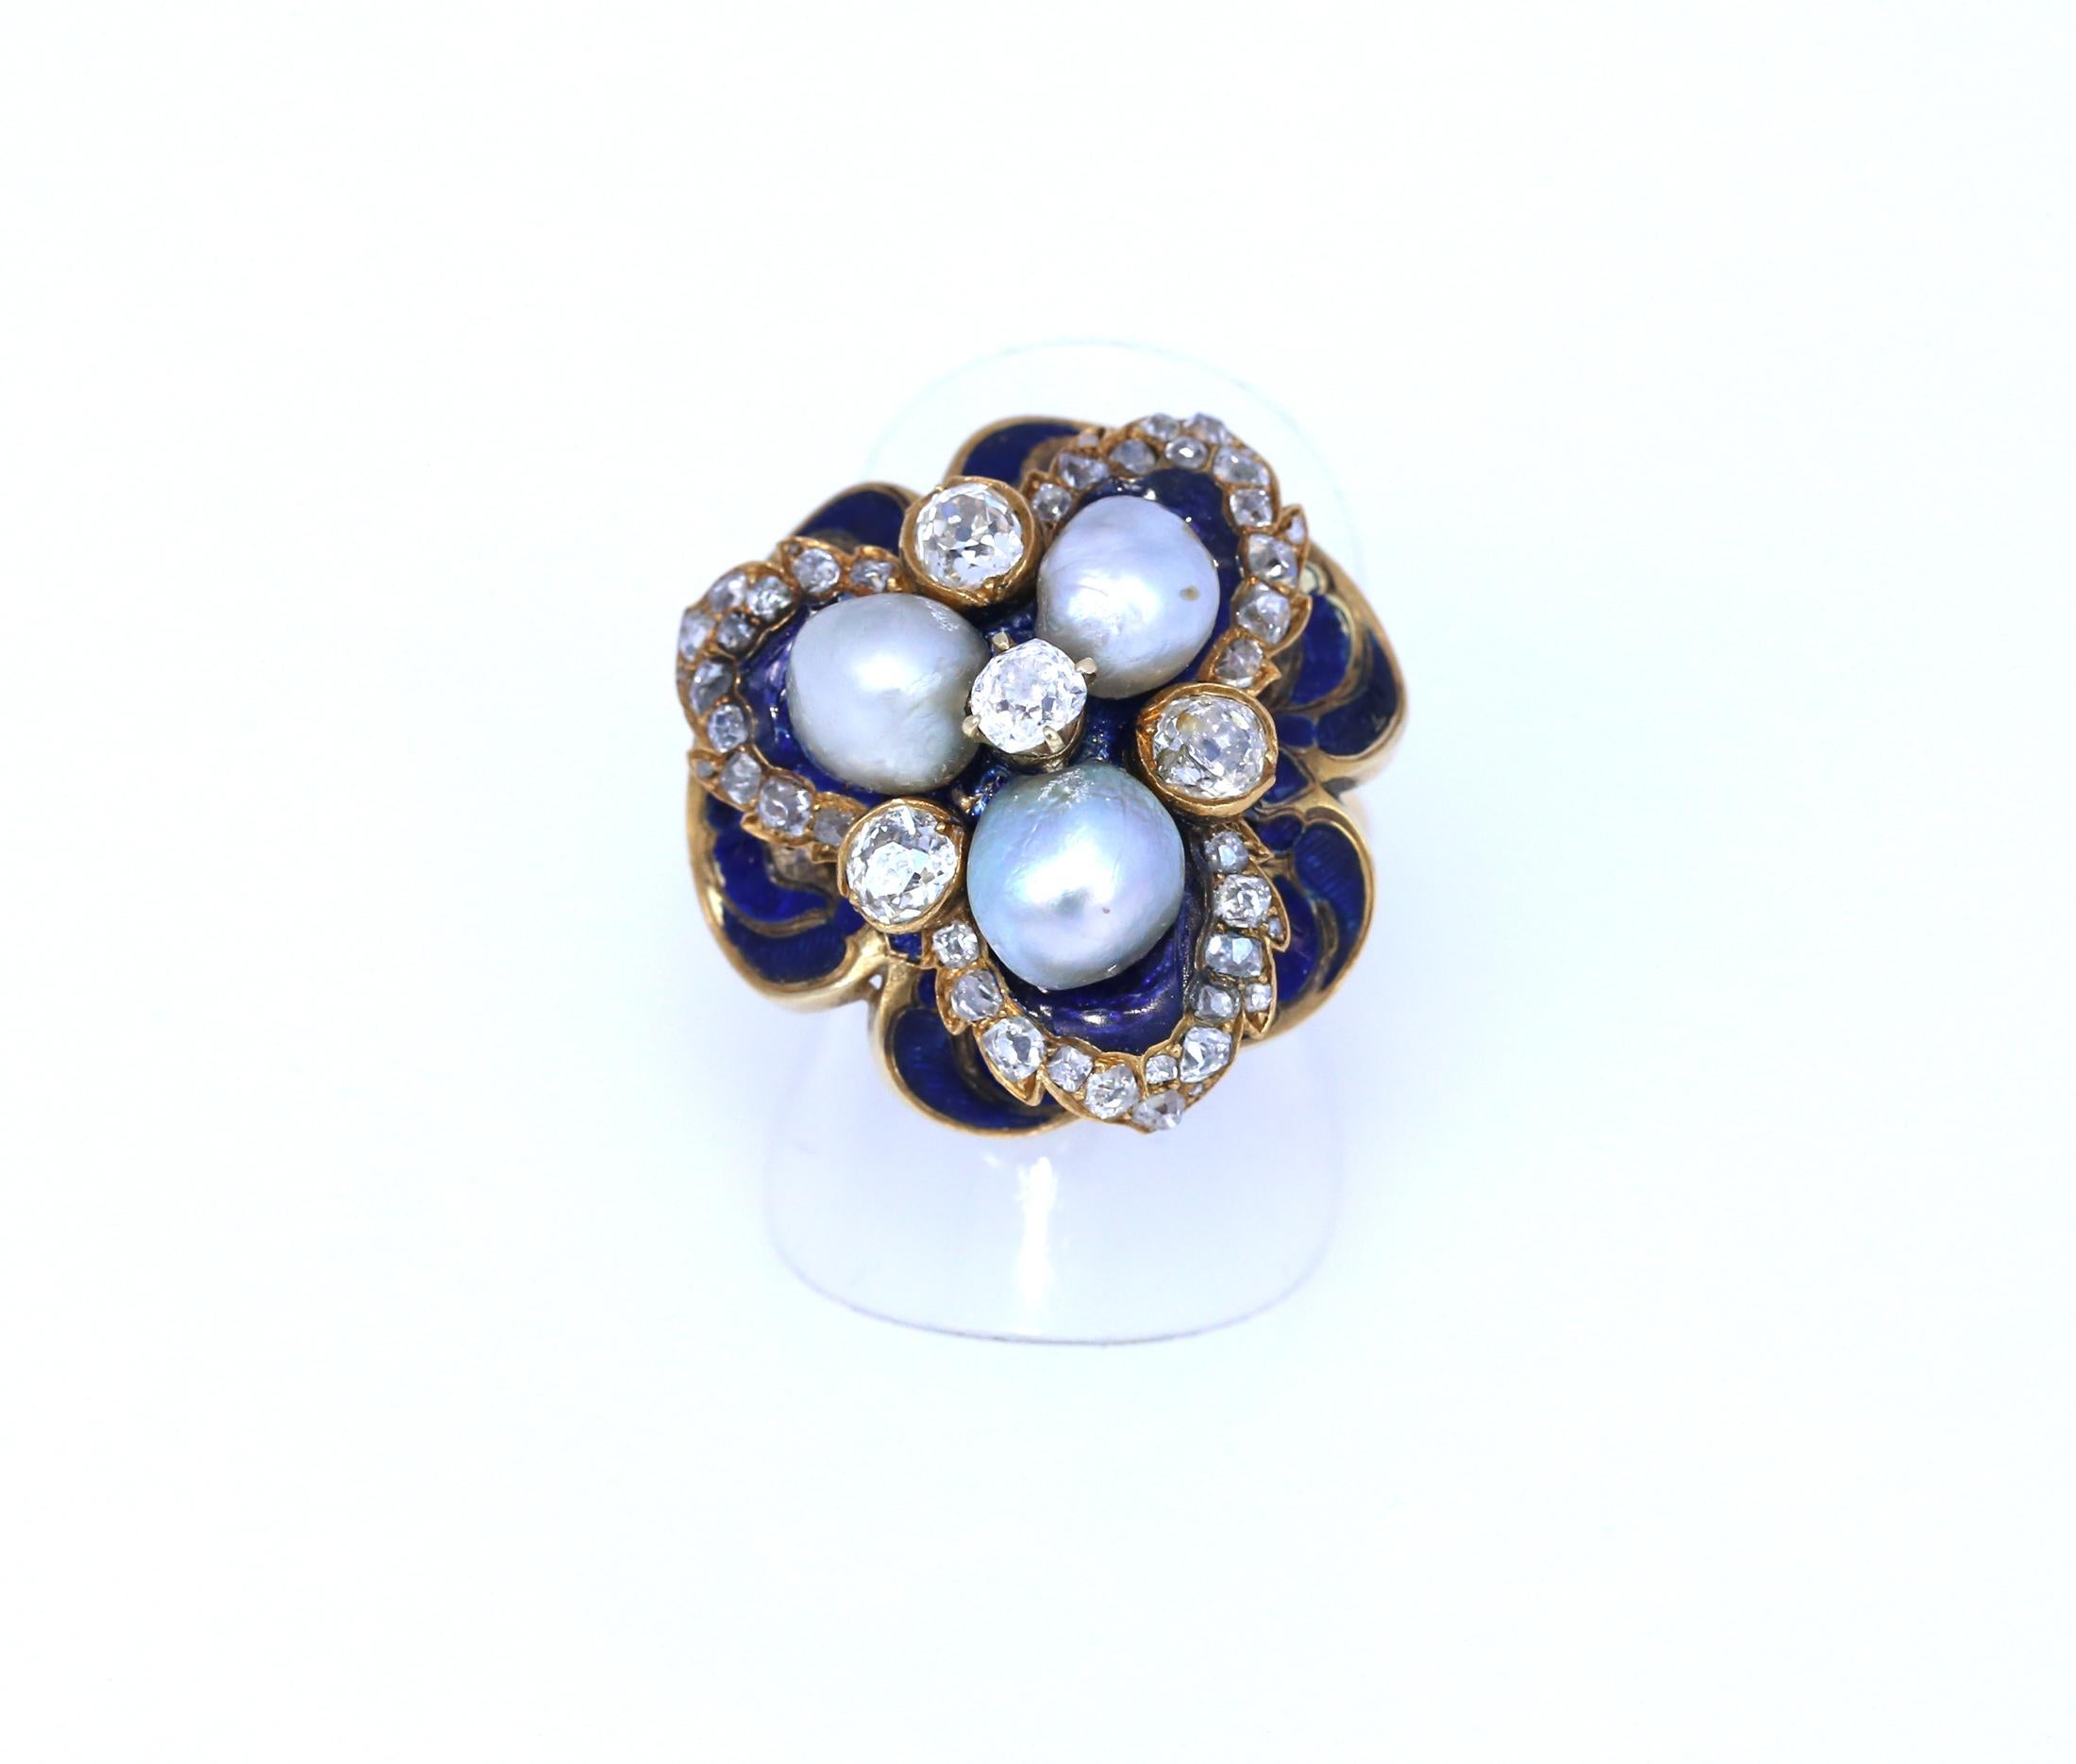 Natural Pearls Blue Enamel Ring Diamond Gold European, 1930
Natural Pearls Enamel Diamond Gold Ring. European, was created in 1930. 
Very delicate craftsmen working. As Blue Enamel on uneven Gold surfaces is a very hard task, managed only by the